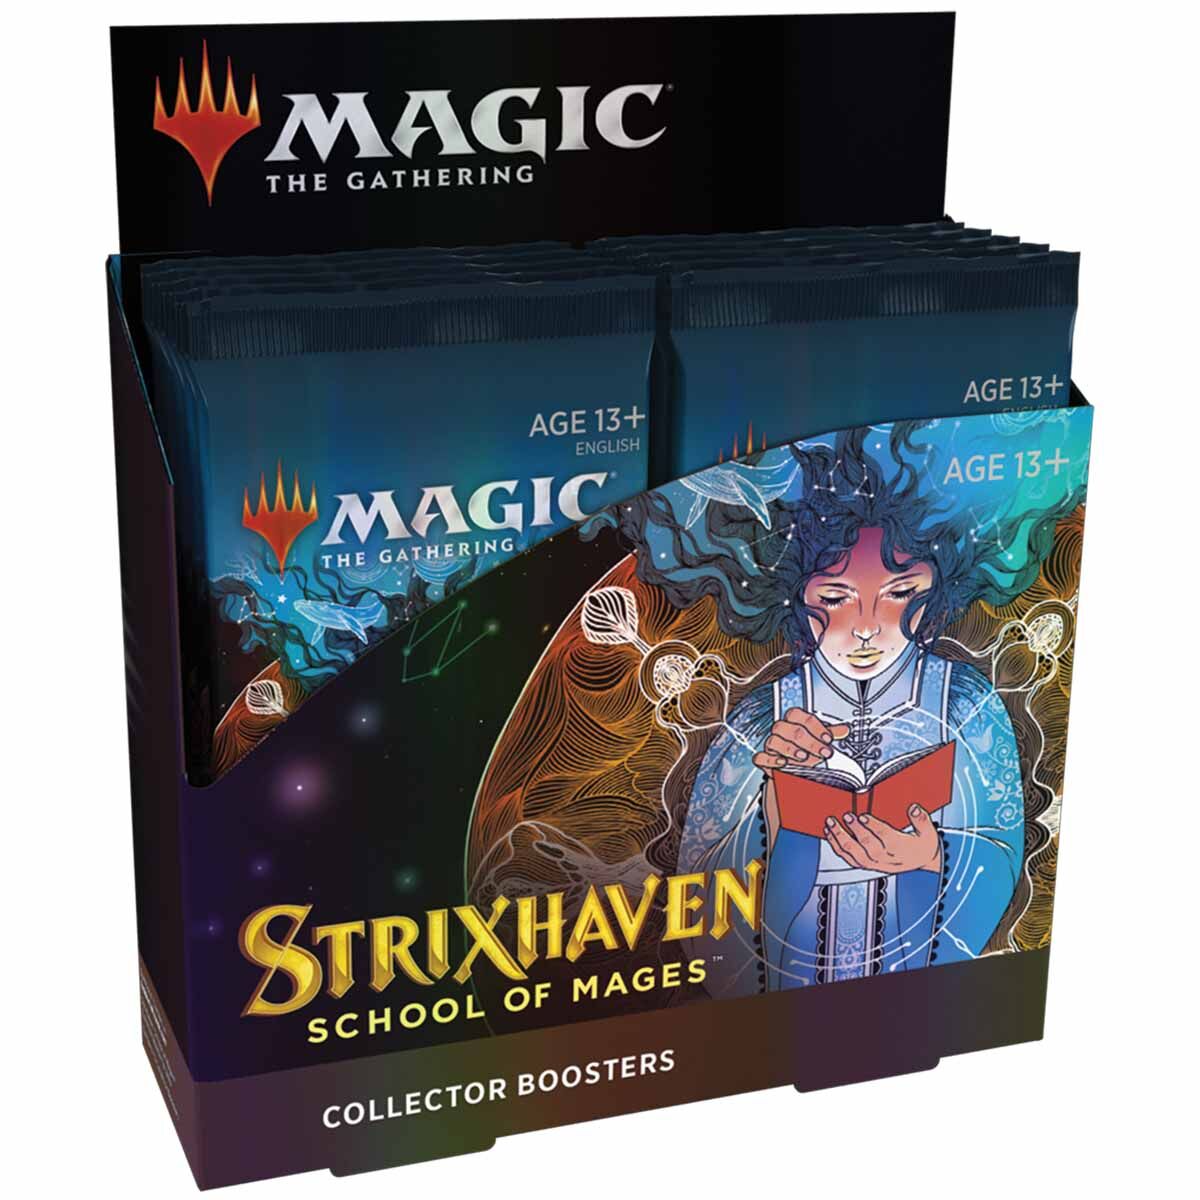 Strixhaven School of Mages Collector Booster Box - Magic the Gathering - EN